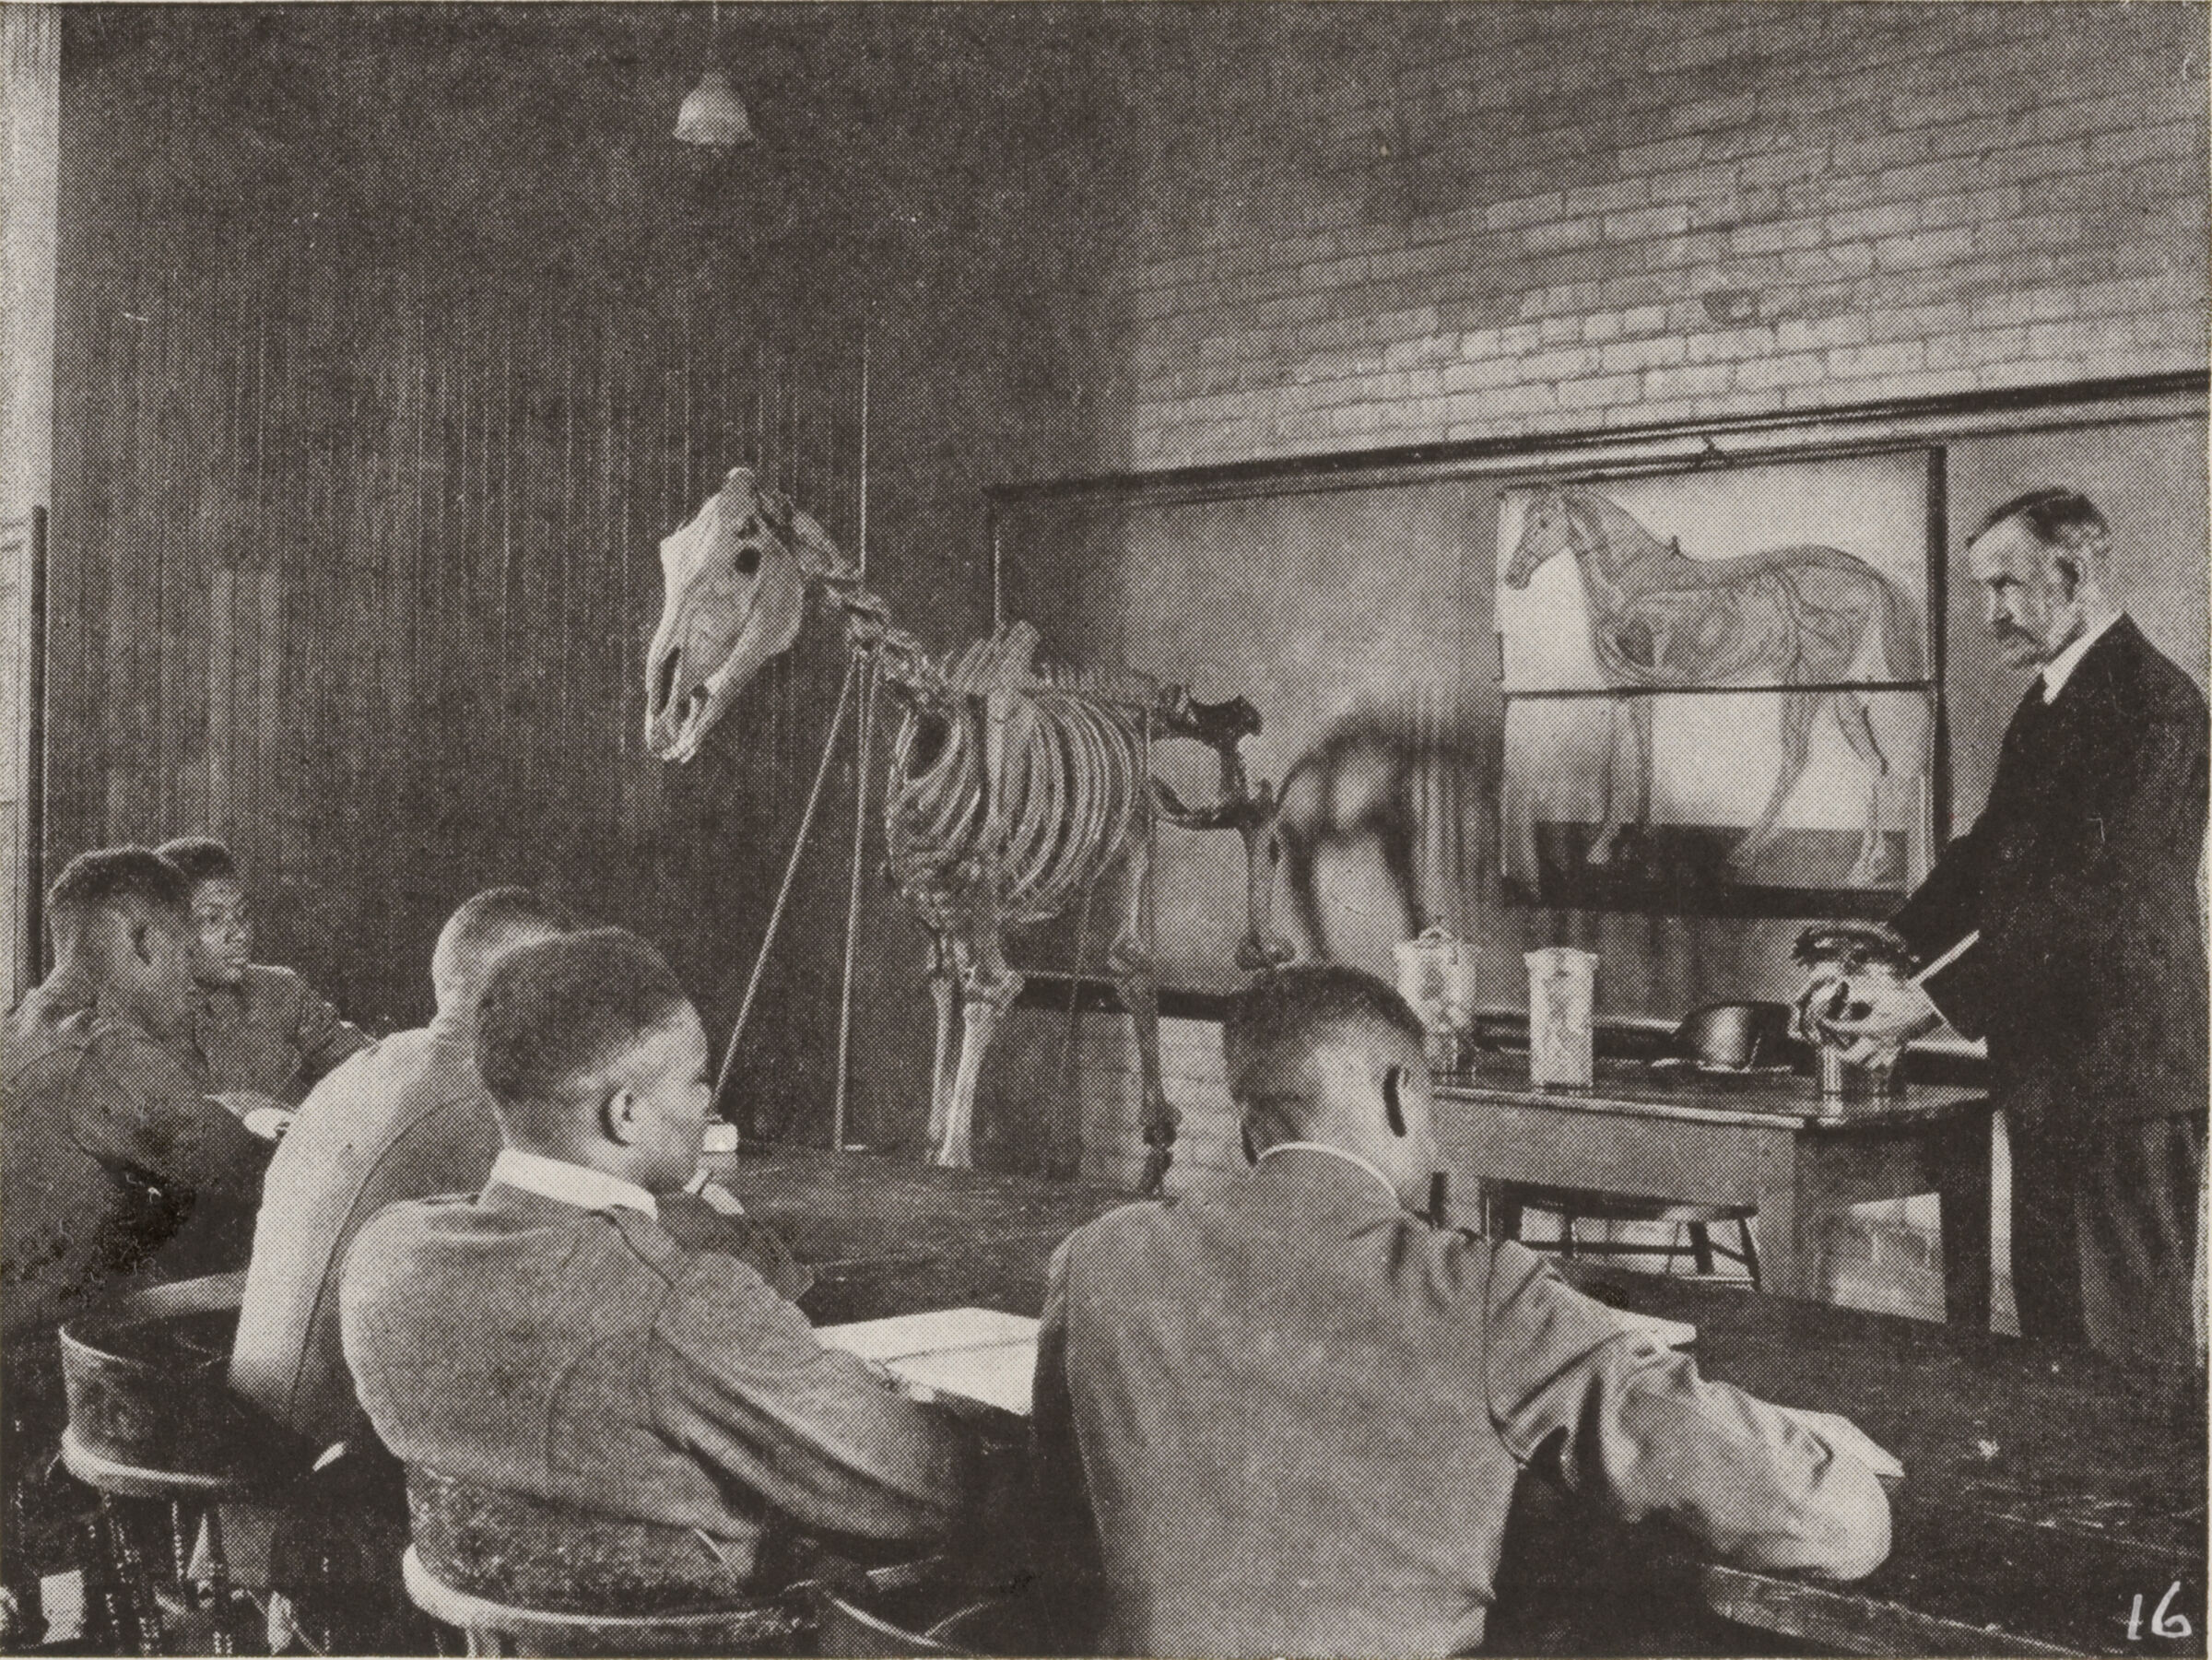 Races, Negroes: United States. Virginia. Hampton. Hampton Normal And Industrial School: Training In Scientific Agriculture: Agricultural Class At Hampton Institute Studying The Anatomy Of The Horse